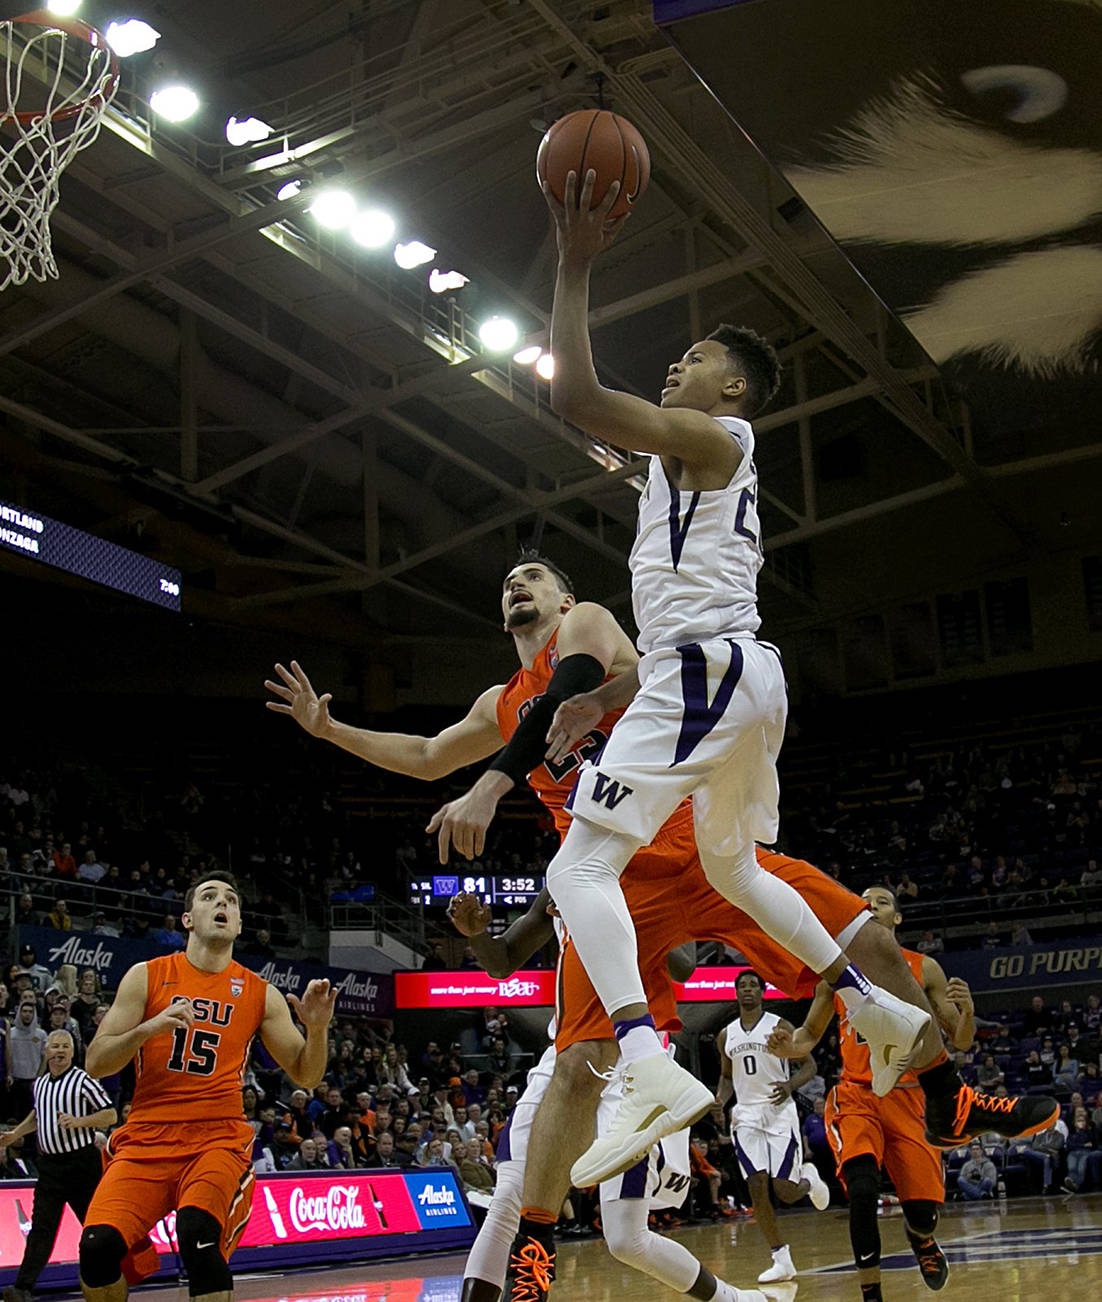 (Johnny Andrews | Seattle Times) Washington’s Markelle Fultz, top, drives to the basket against Oregon State’s Gligorije Rakocevic during the second half on Saturday, Jan. 7 at Alaska Airlines Arena in Seattle. Washington won, 87-61.